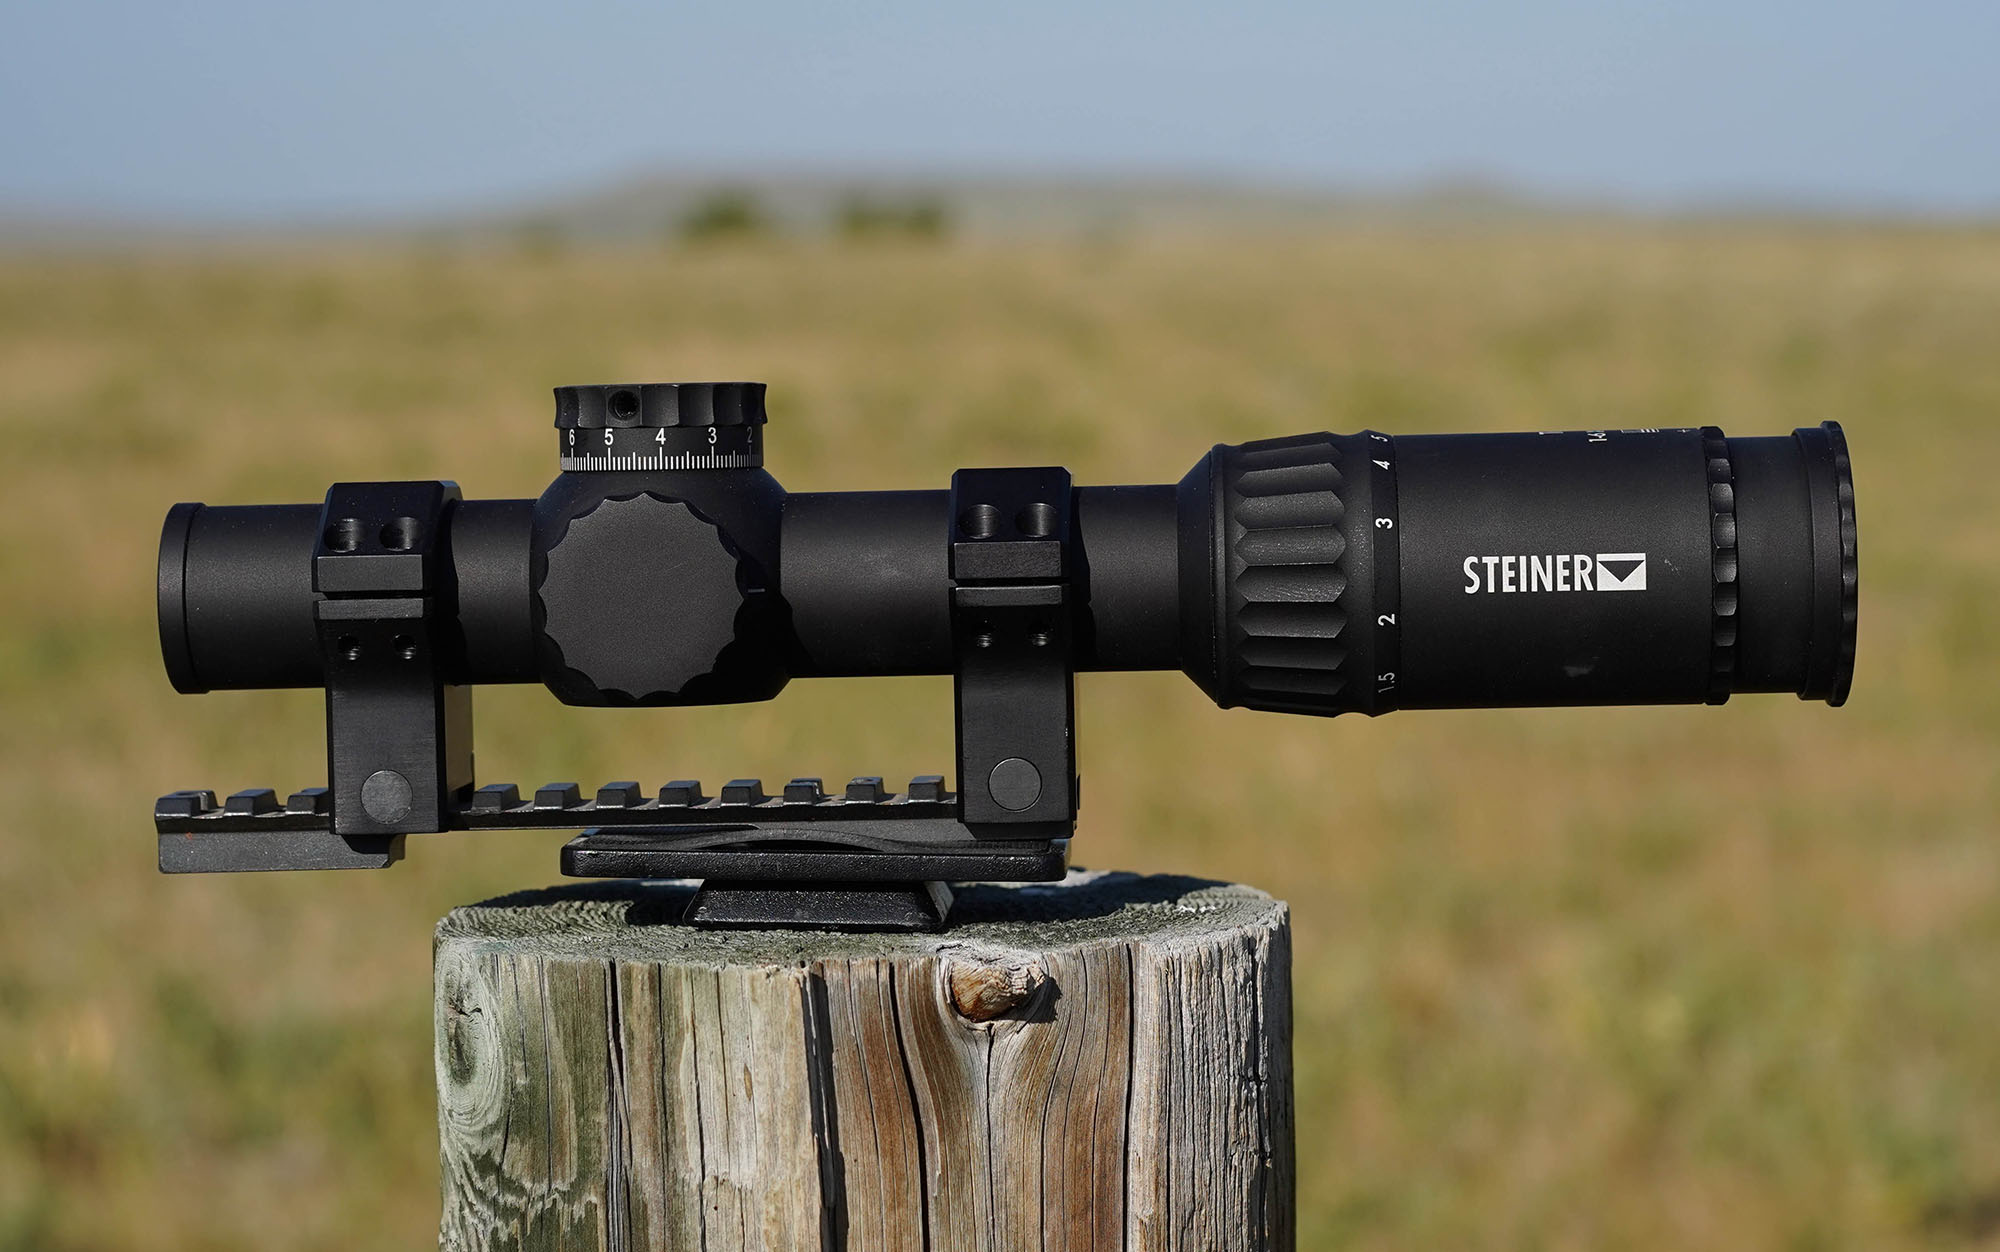 We tested the Steiner T6Xi 1-6x24.